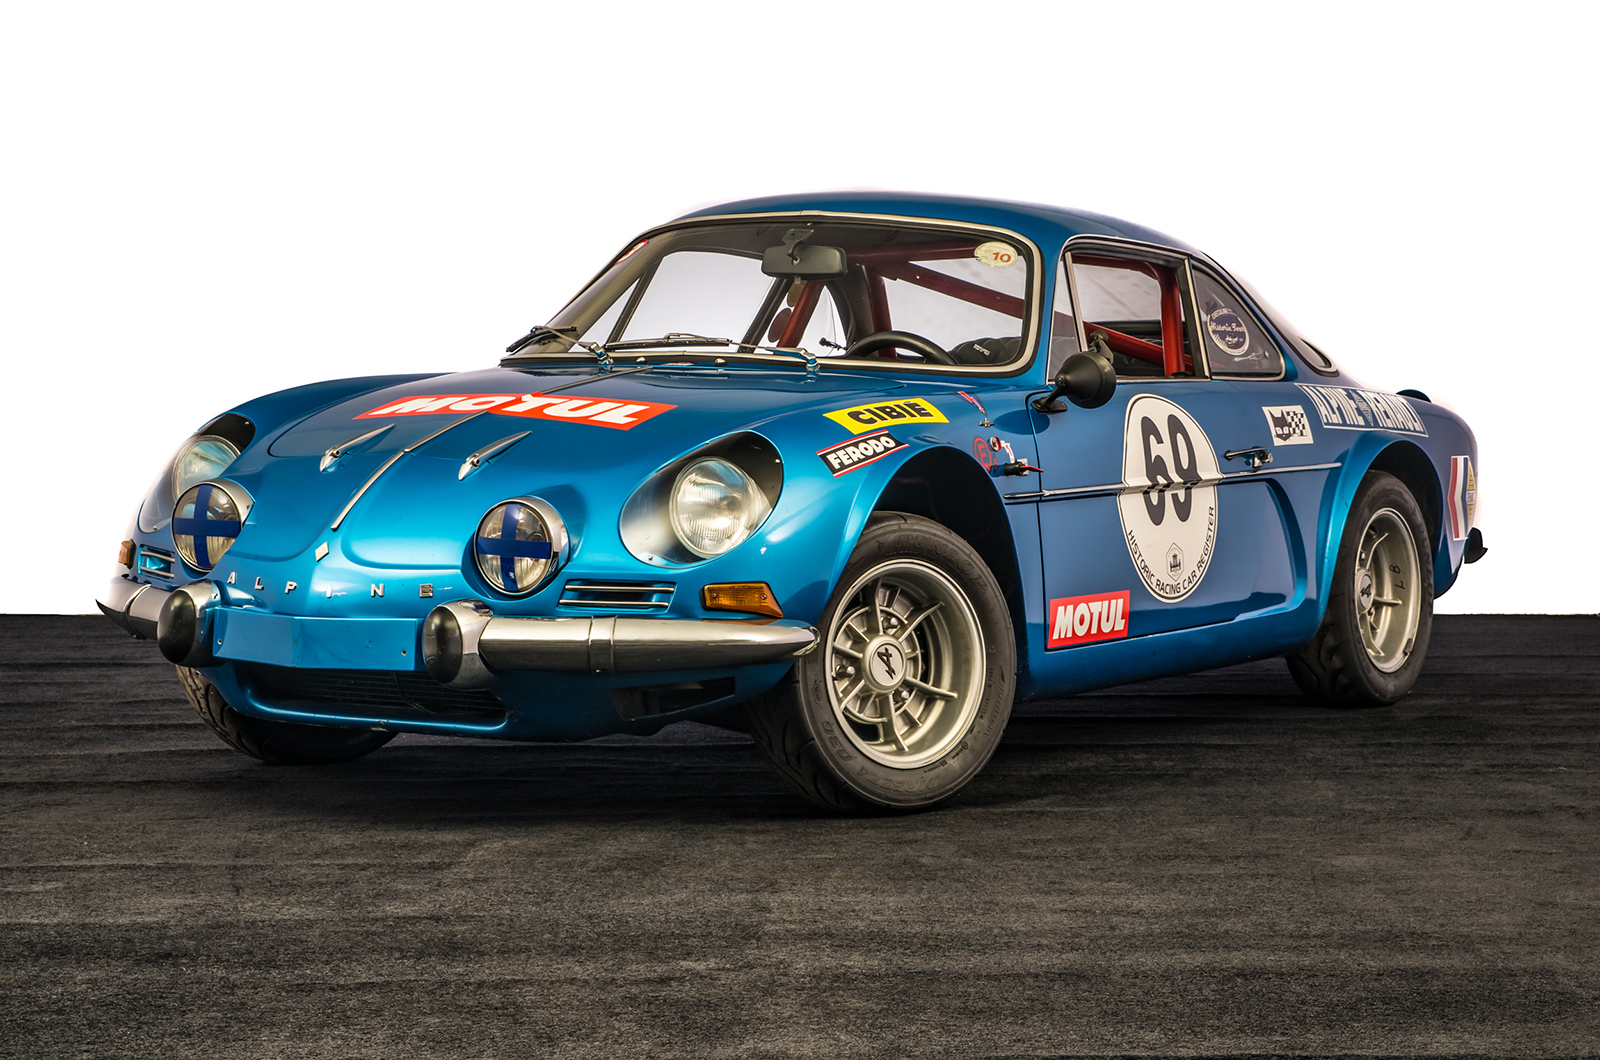 Classic & Sports Car – Classics set to sparkle in African sale